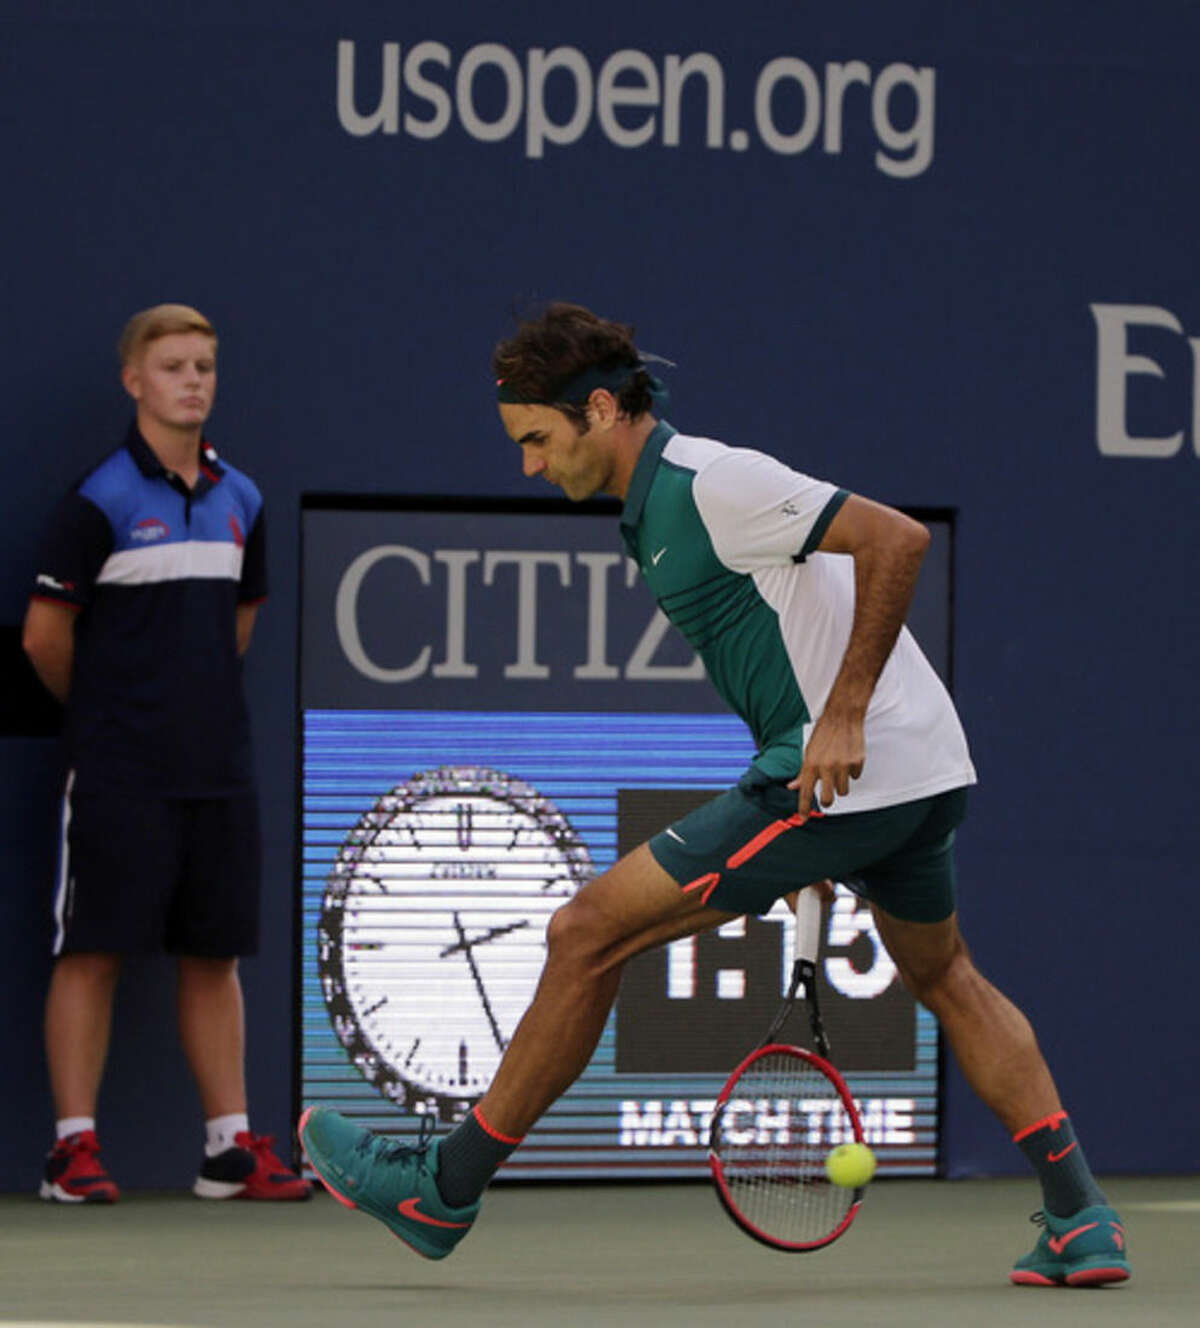 Roger Federer, of Switzerland, returns a shot from between his legs to Philipp Kohlschreiber, of Germany, during the third round of the U.S. Open tennis tournament, Saturday, Sept. 5, 2015, in New York. (AP Photo/Charles Krupa)